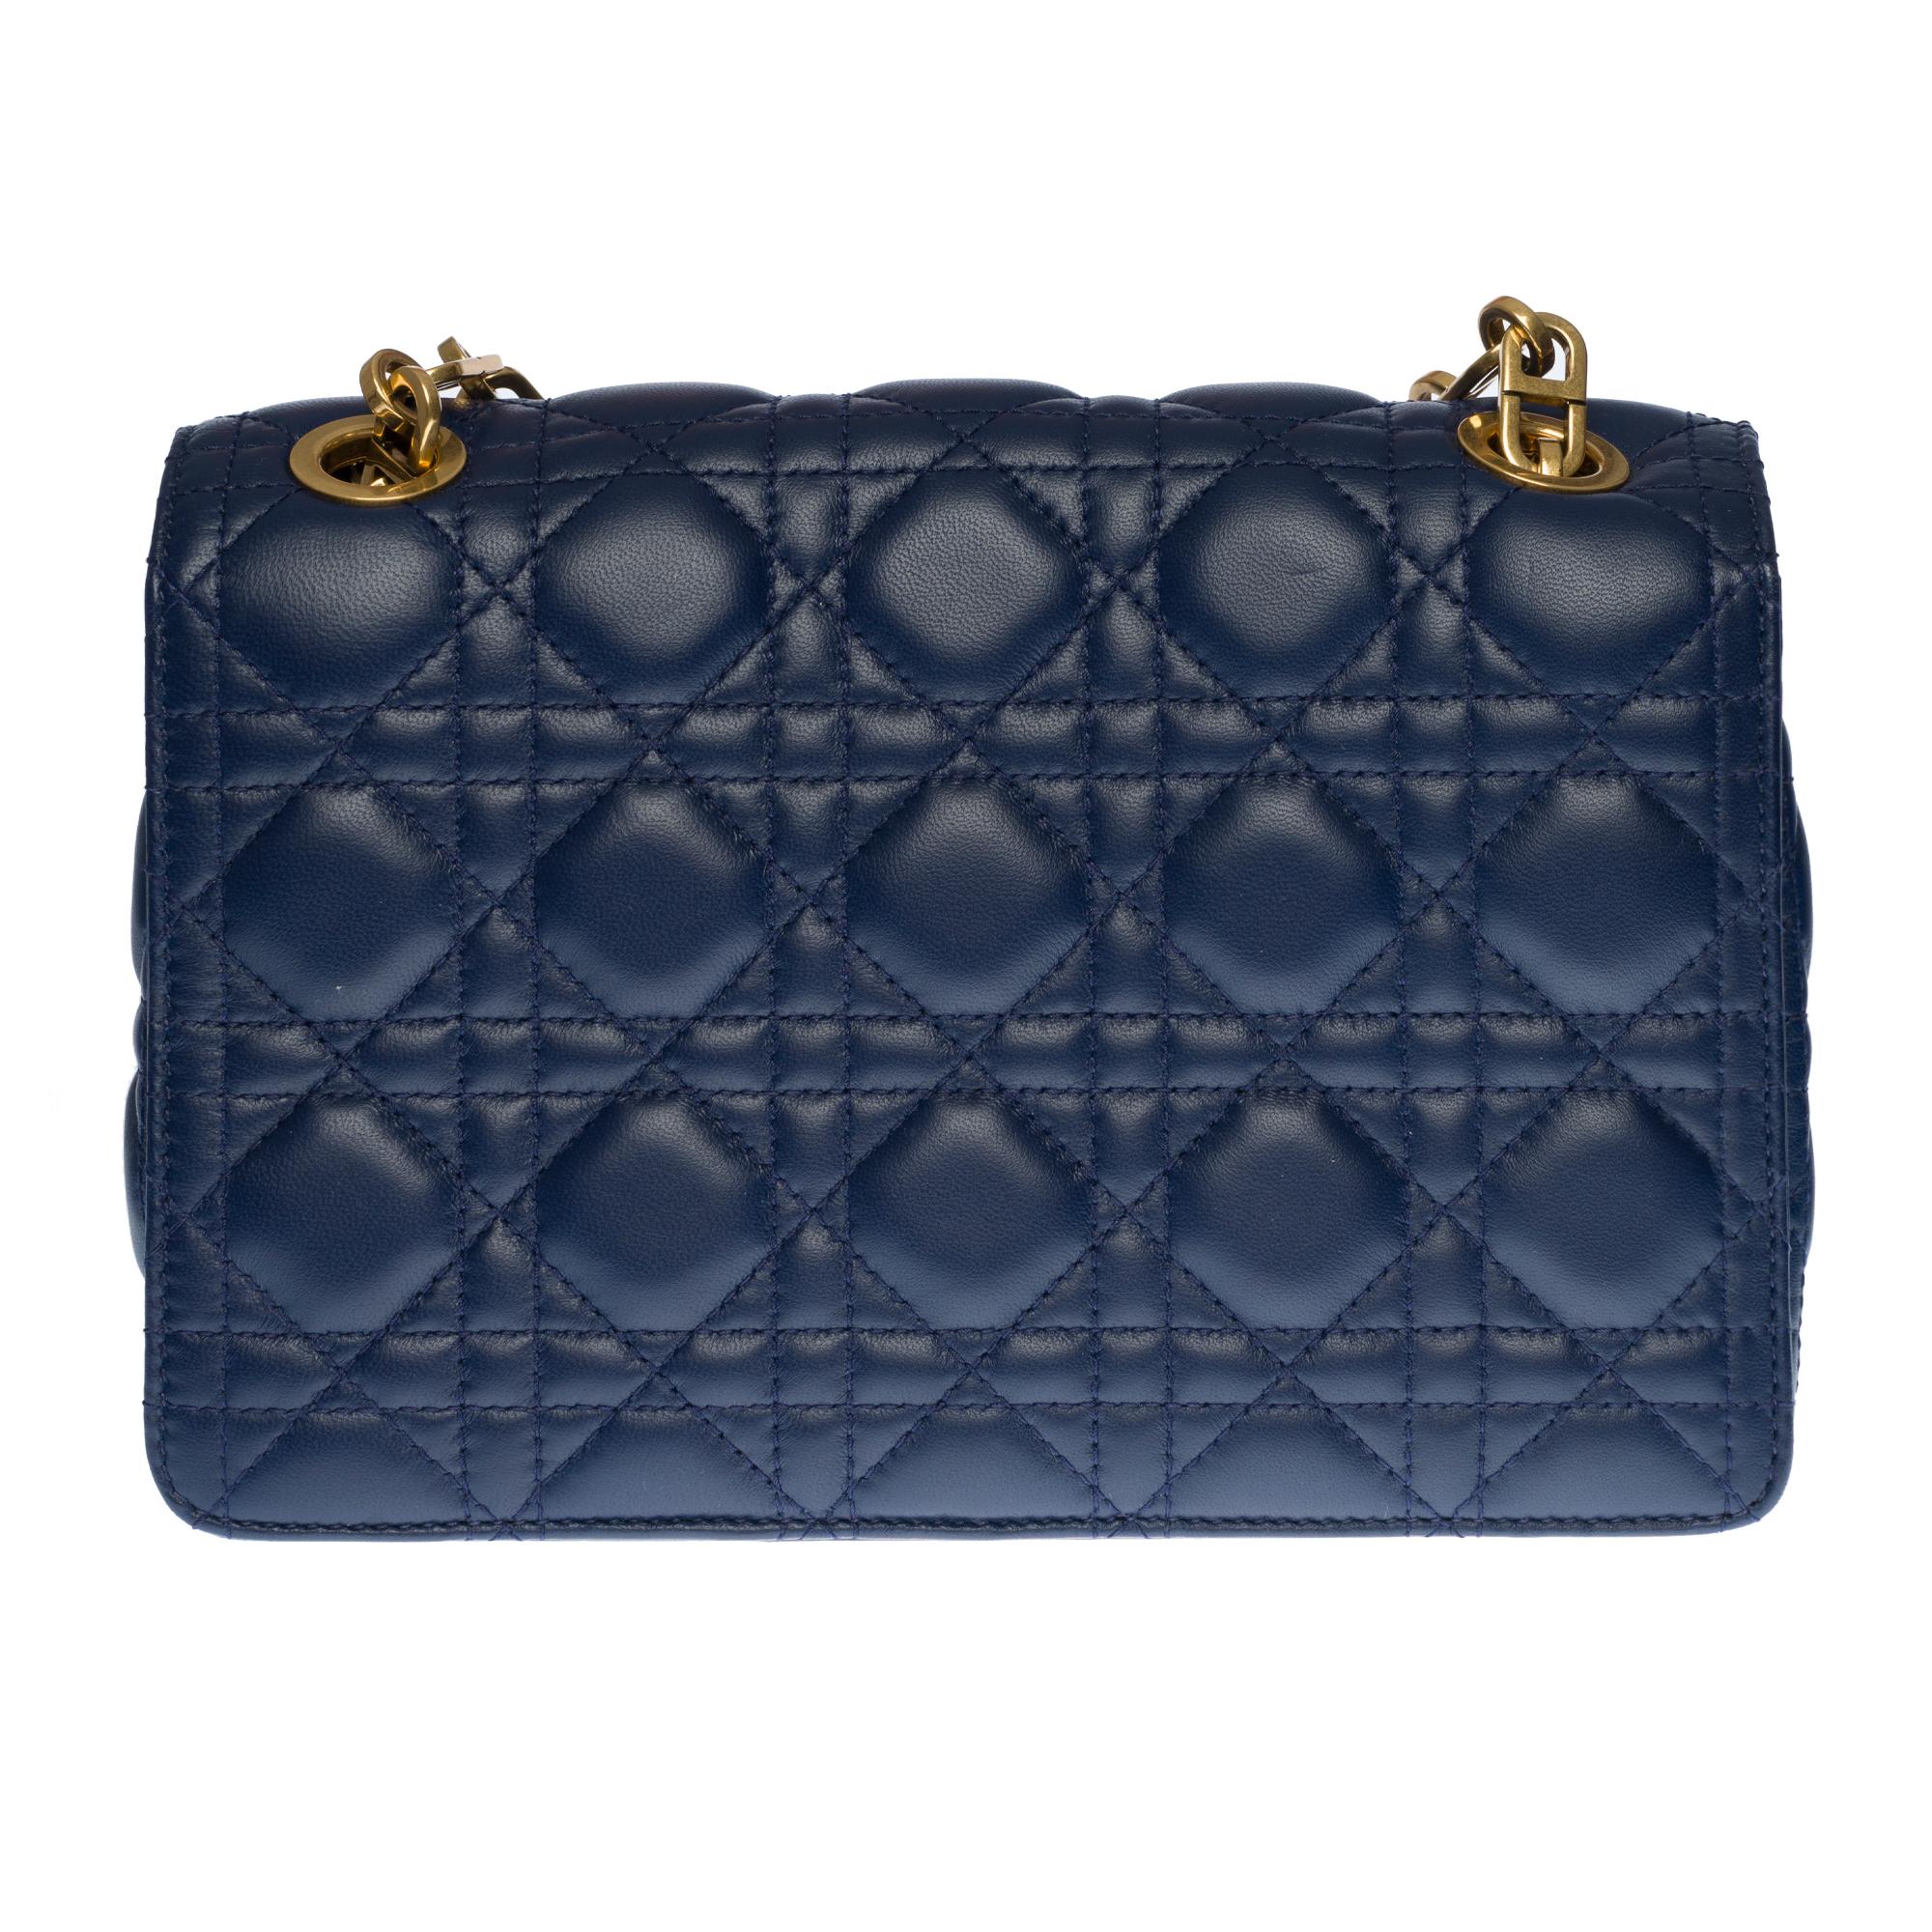 Elegant shoulder bag Christian Dior Miss Dior with double flap in navy blue cannage leather, gold metal hardware, a chain handle transformable into gold metal allowing a hand or shoulder or shoulder strap.

Closure with flap and clasp stamped in